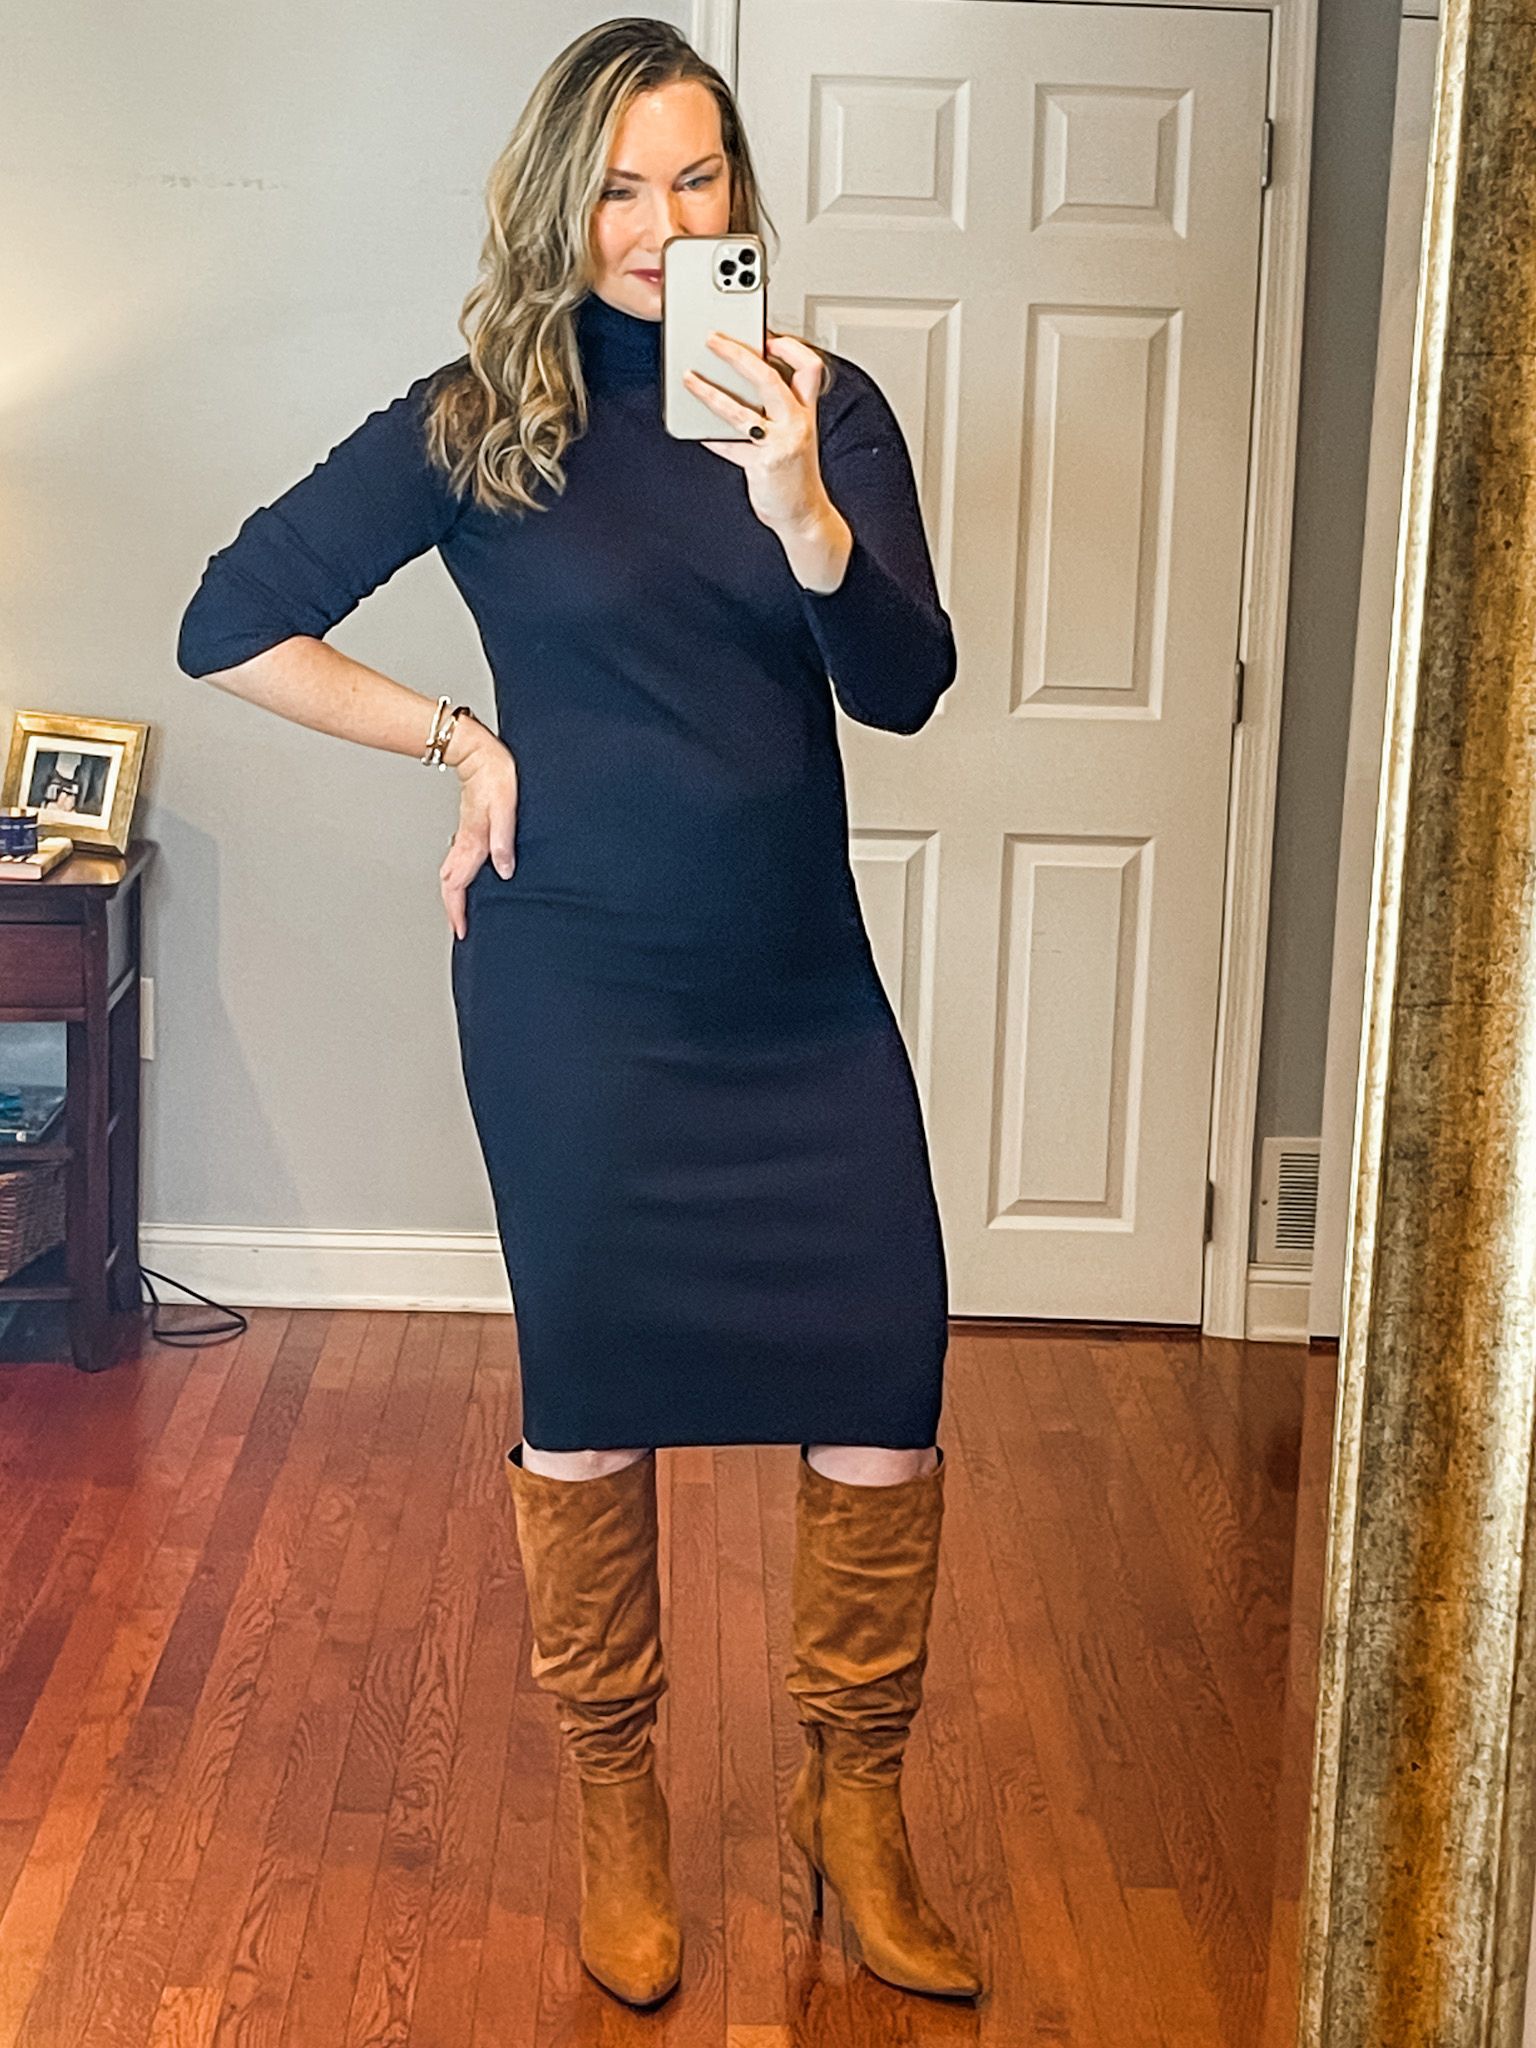 The Unexpected Dress I Bought in Three Colors